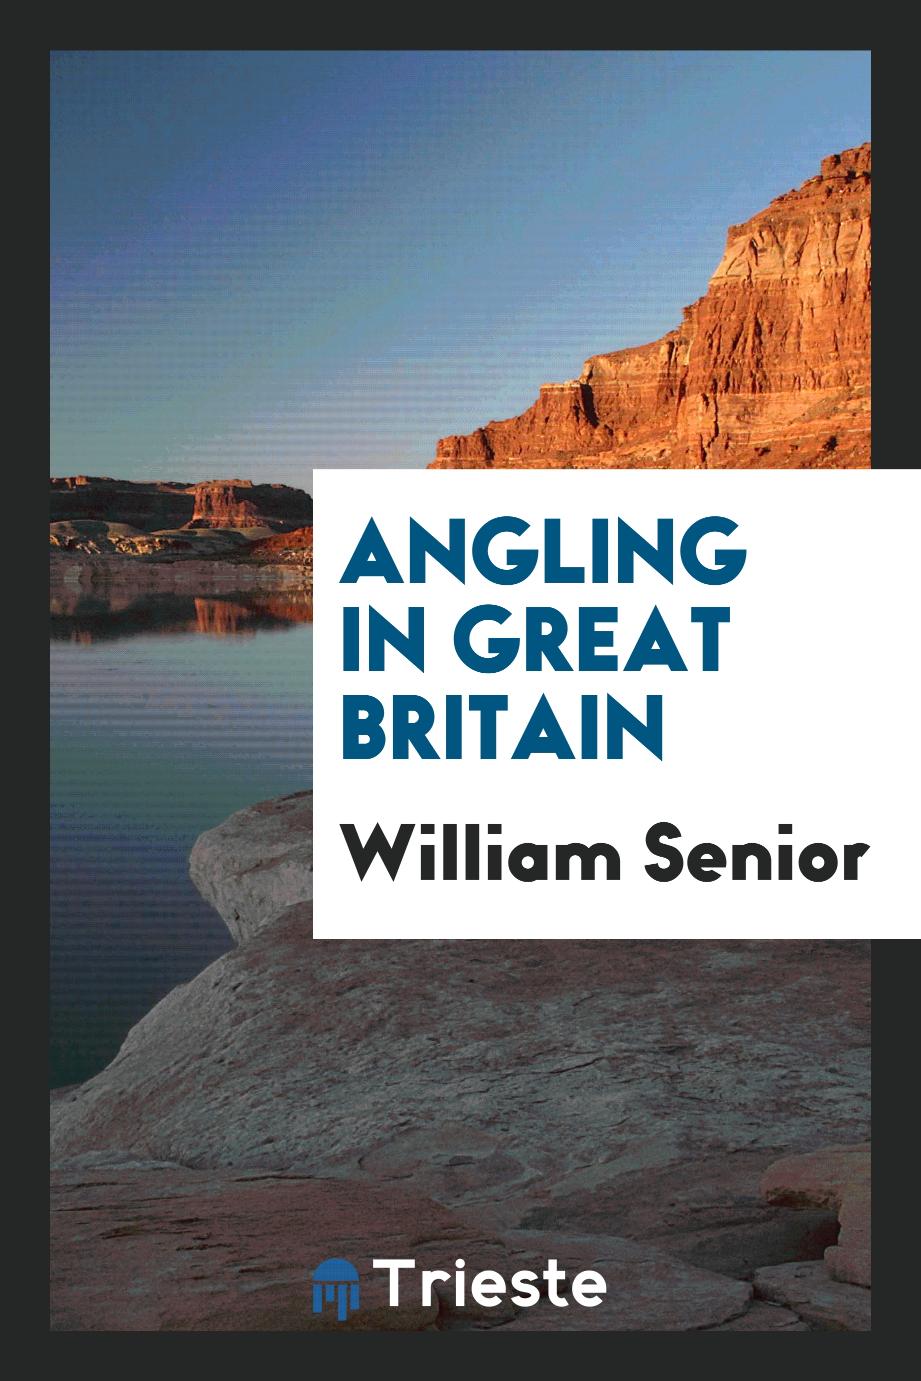 Angling in Great Britain